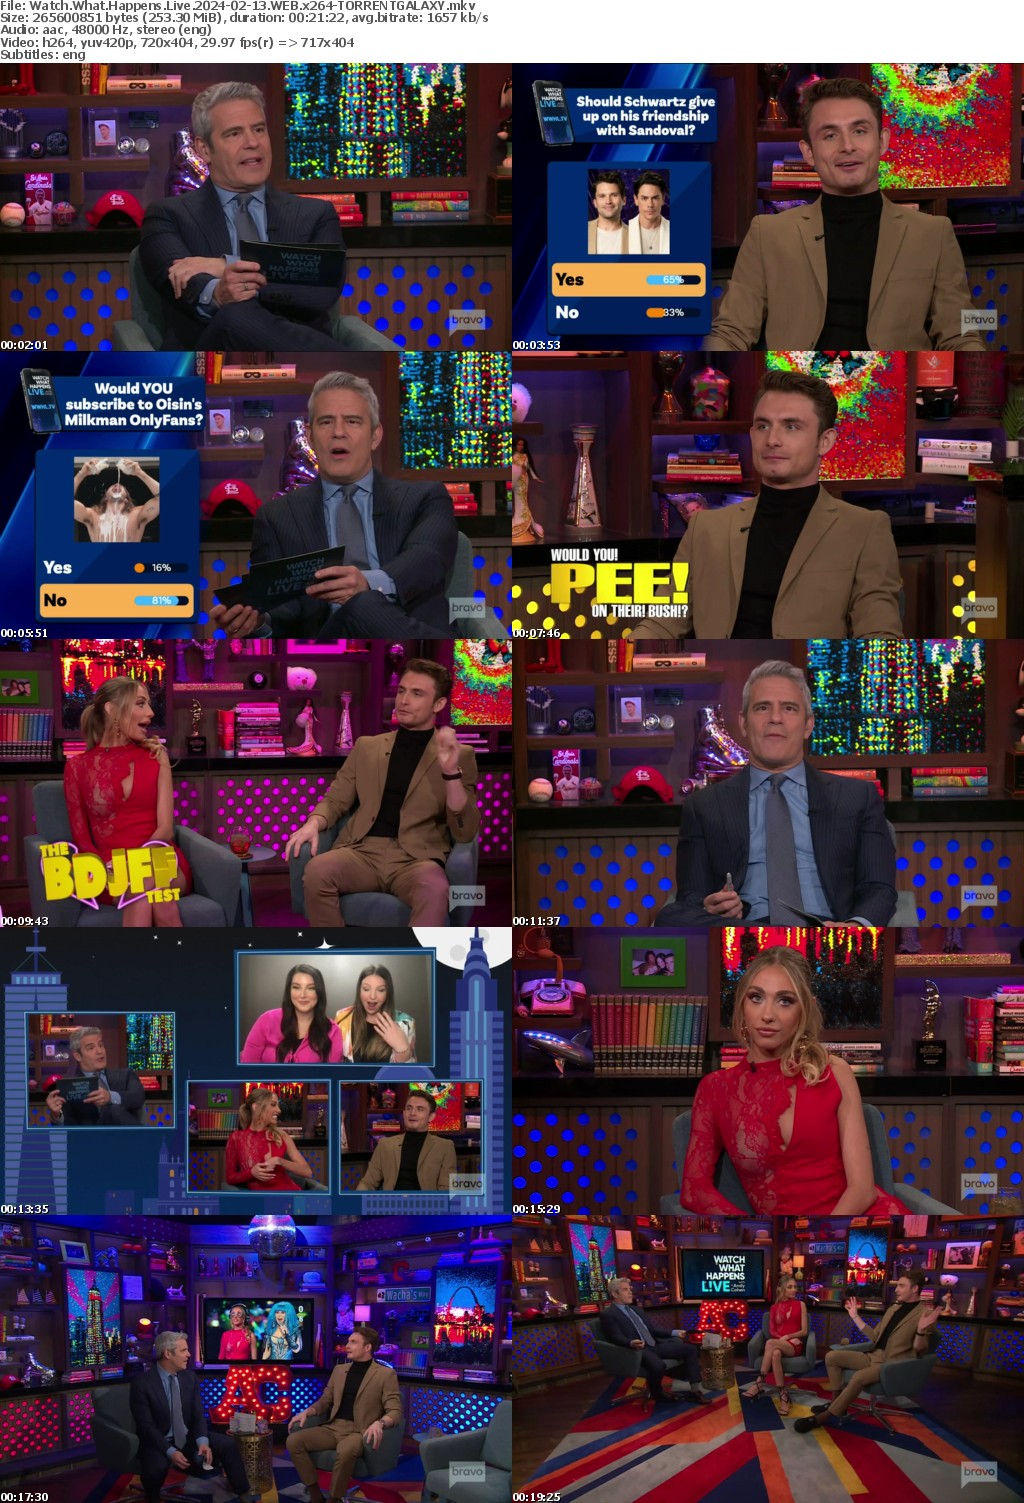 Watch What Happens Live 2024-02-13 WEB x264-GALAXY